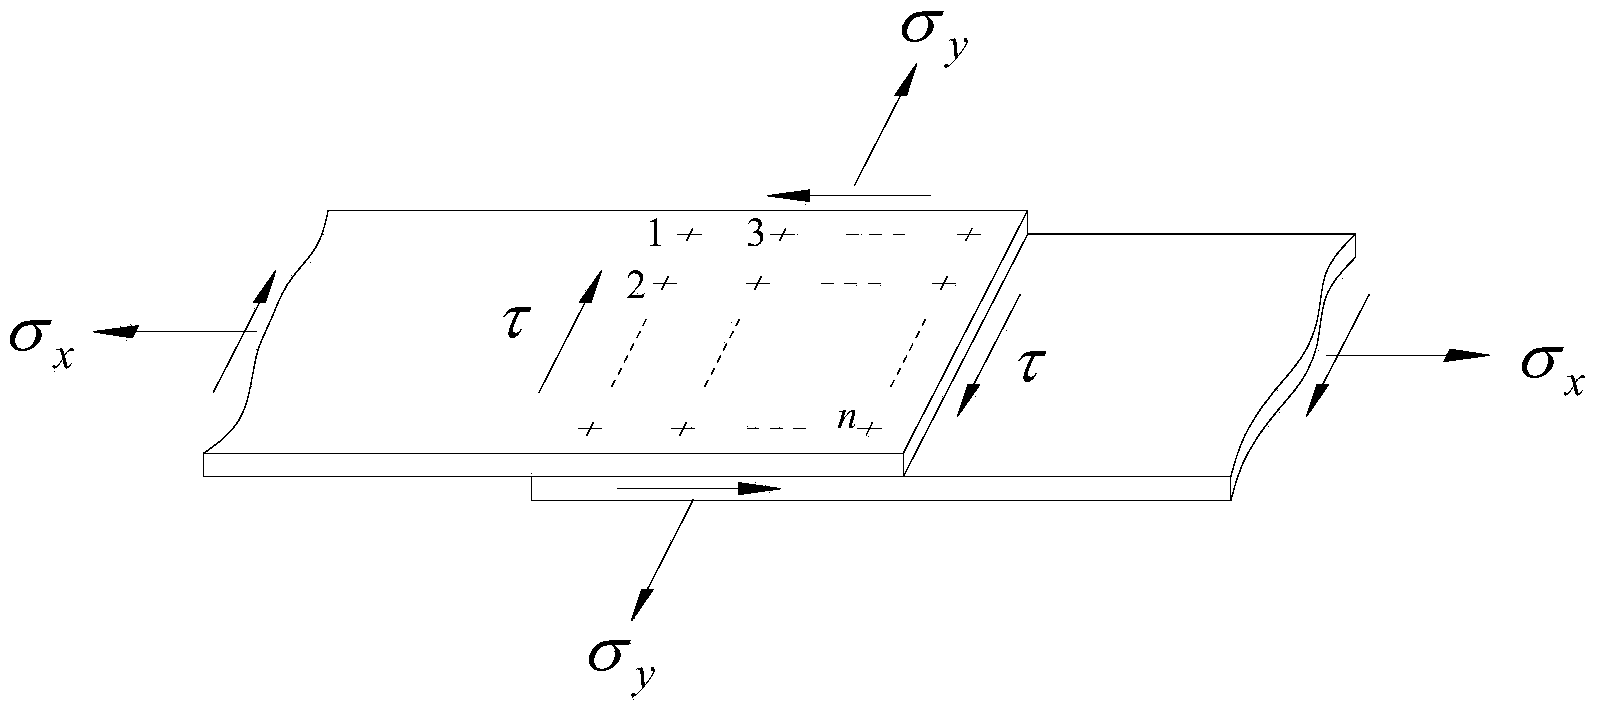 Method for predicting fatigue life of multi-nail connecting pieces under spectrum loading